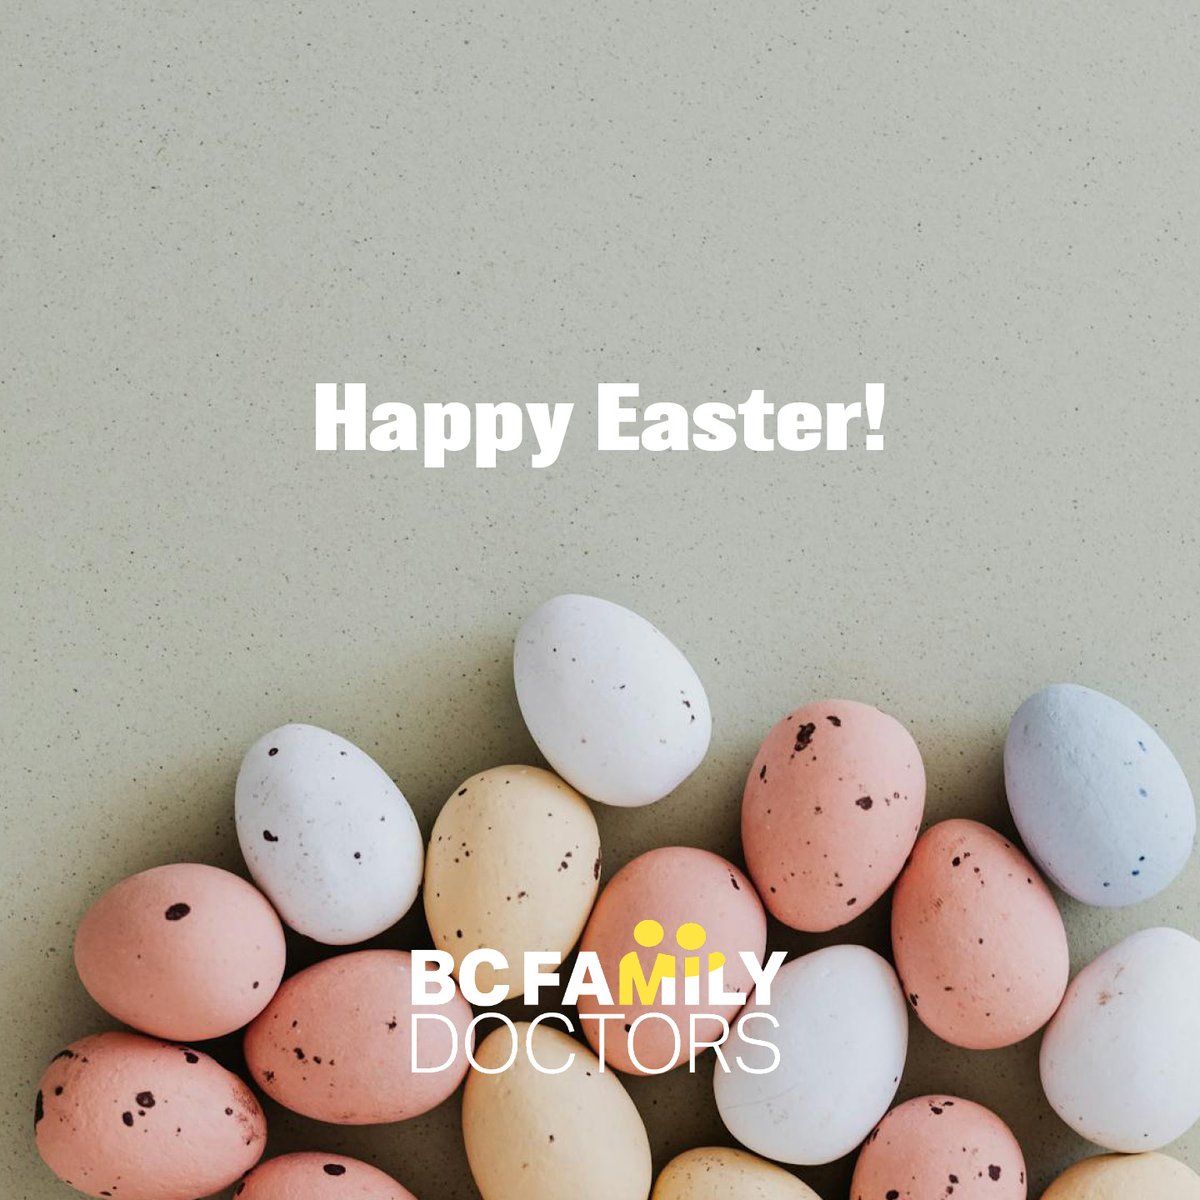 Happy Easter! Wishing all of our colleagues and followers a joyful long weekend. Let's hope sunshine is in the forecast for those backyard egg hunts! Thanks to the thousands of healthcare workers around the country who are caring for patients this weekend.